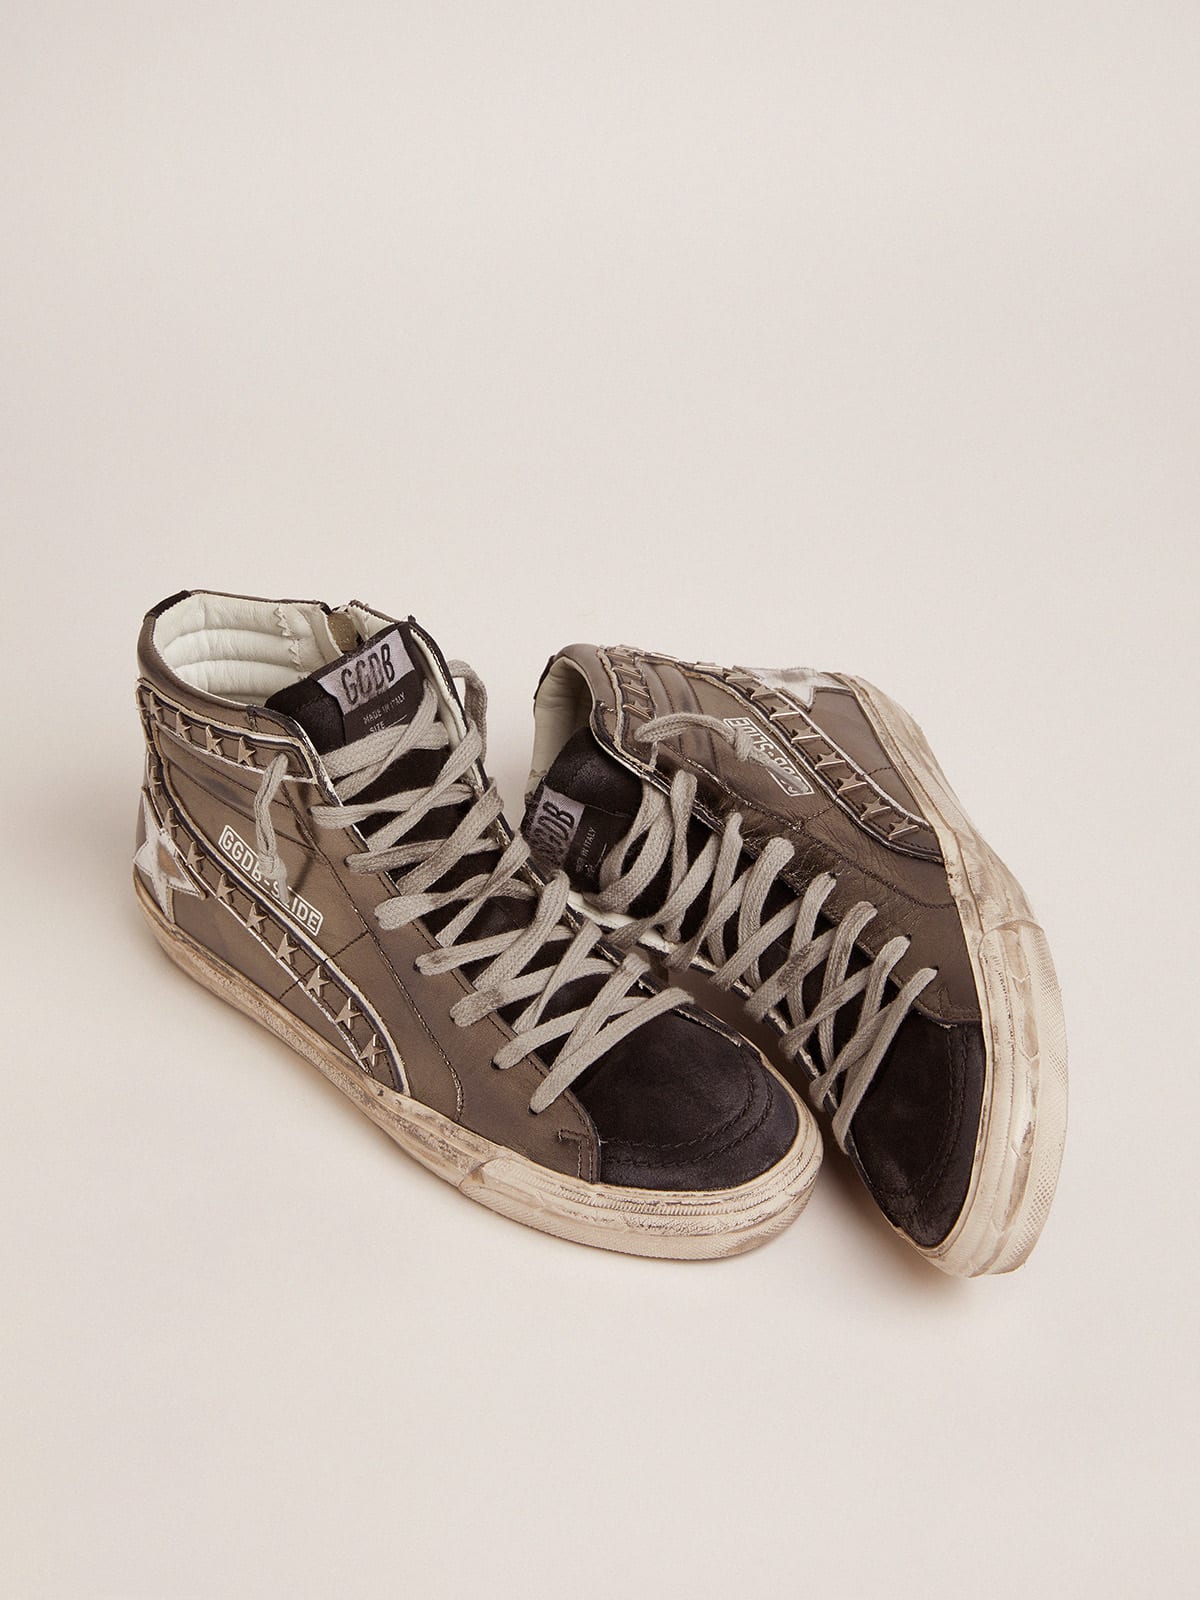 Golden Goose - Slide sneakers with silver laminated leather upper and star-shaped studs in 